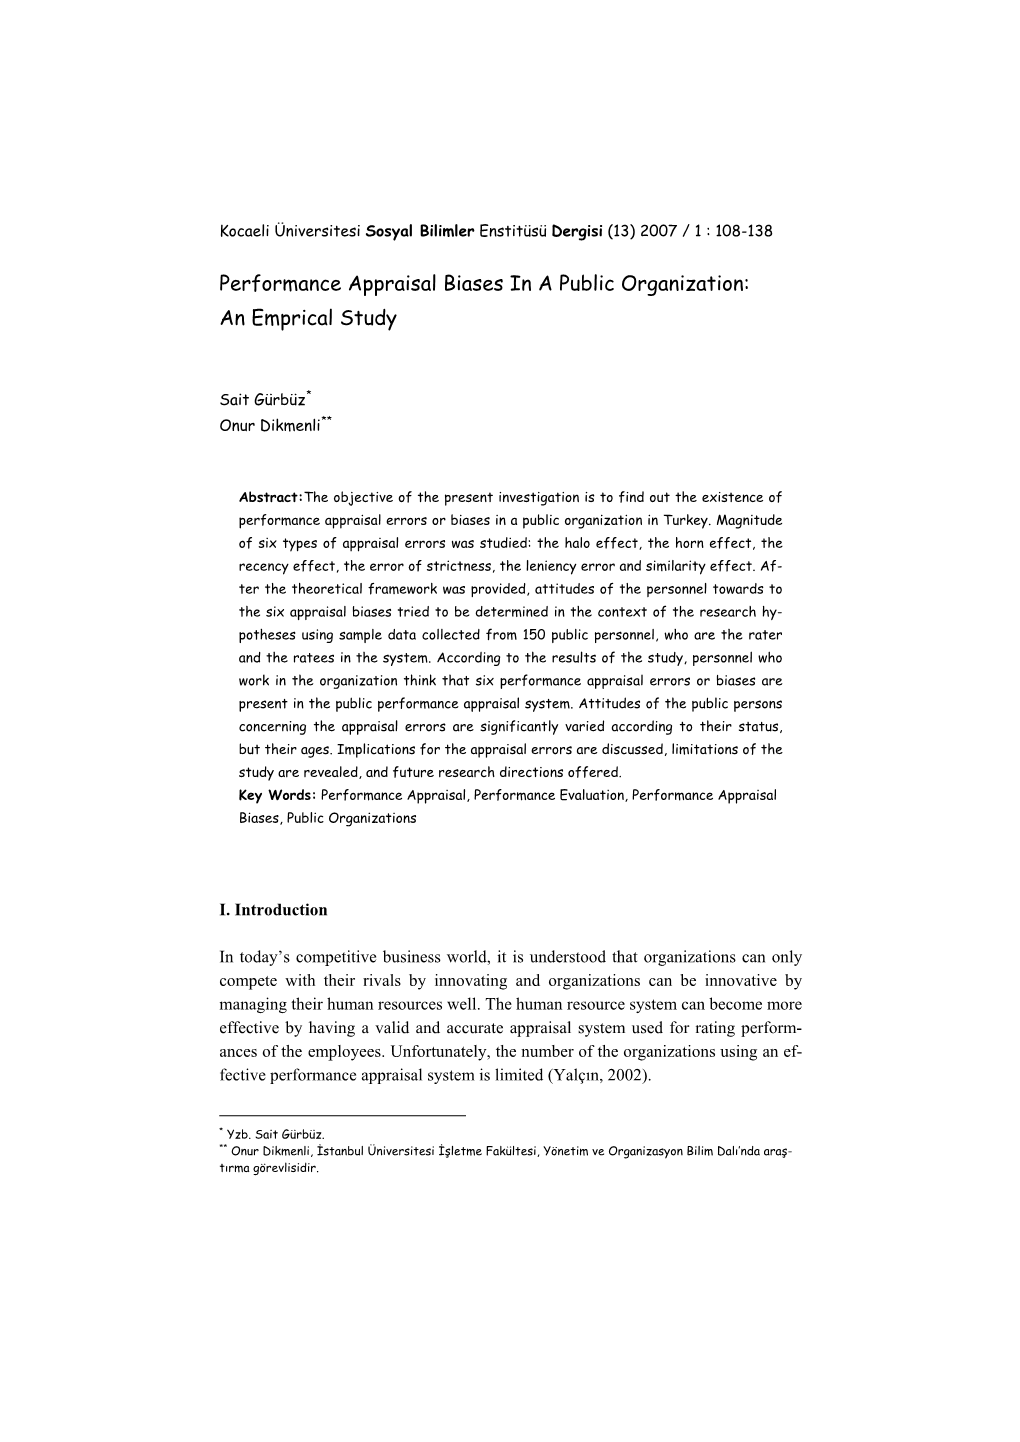 Performance Appraisal Biases in a Public Organization: an Emprical Study